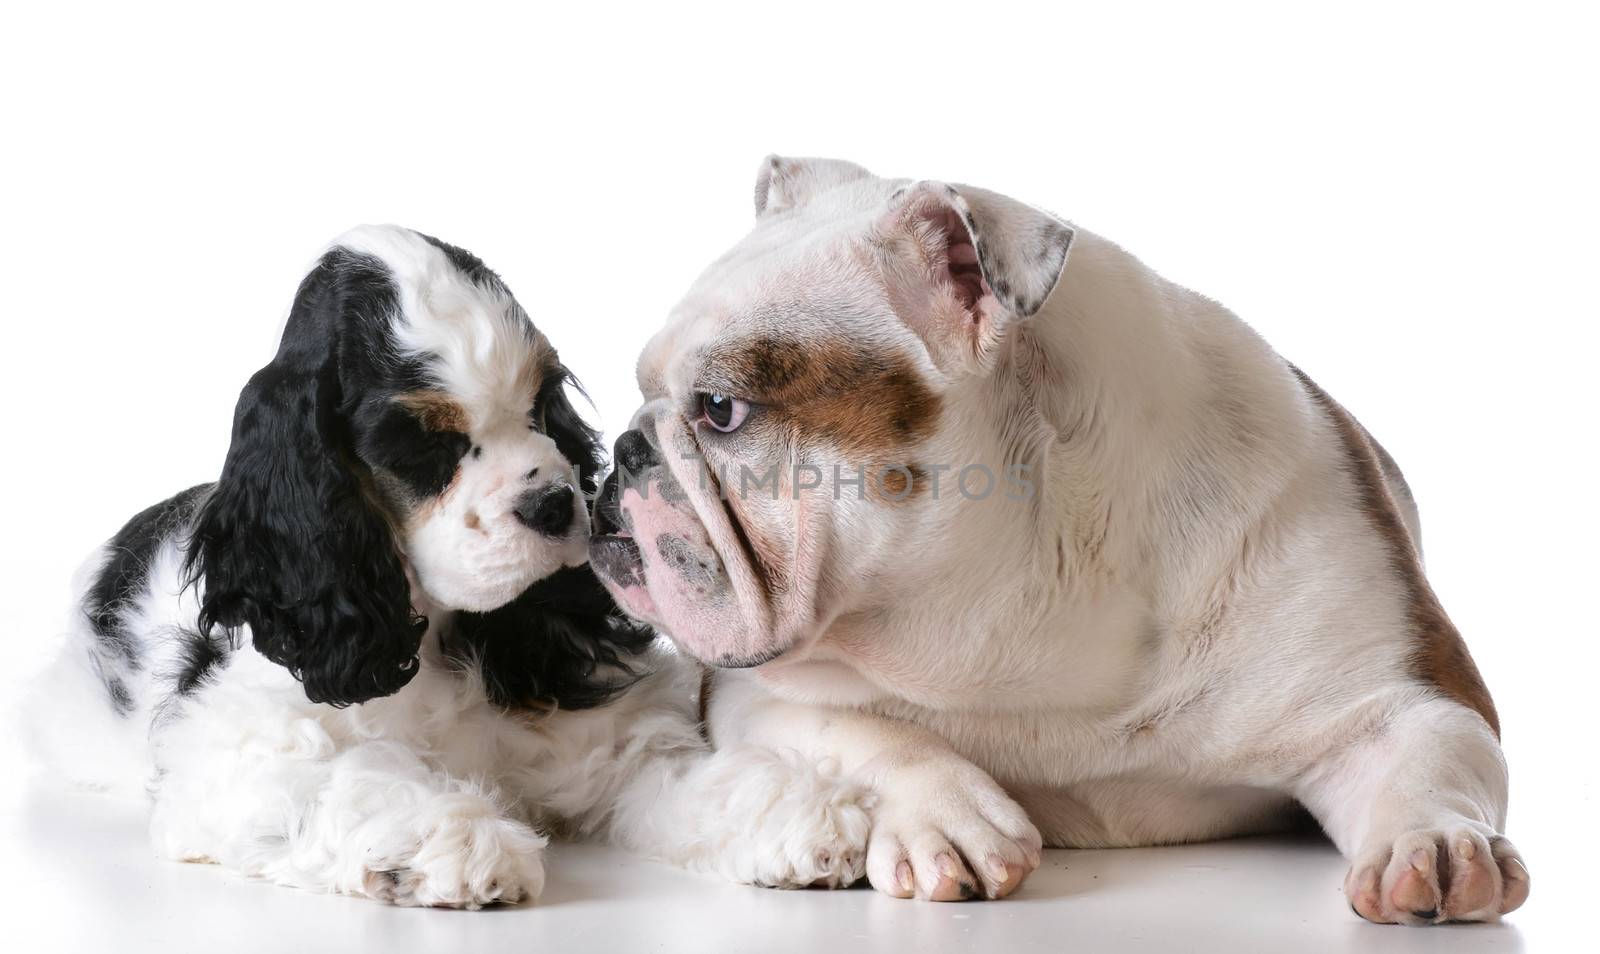 two puppies - american cocker spaniel and english bulldog puppies on white background